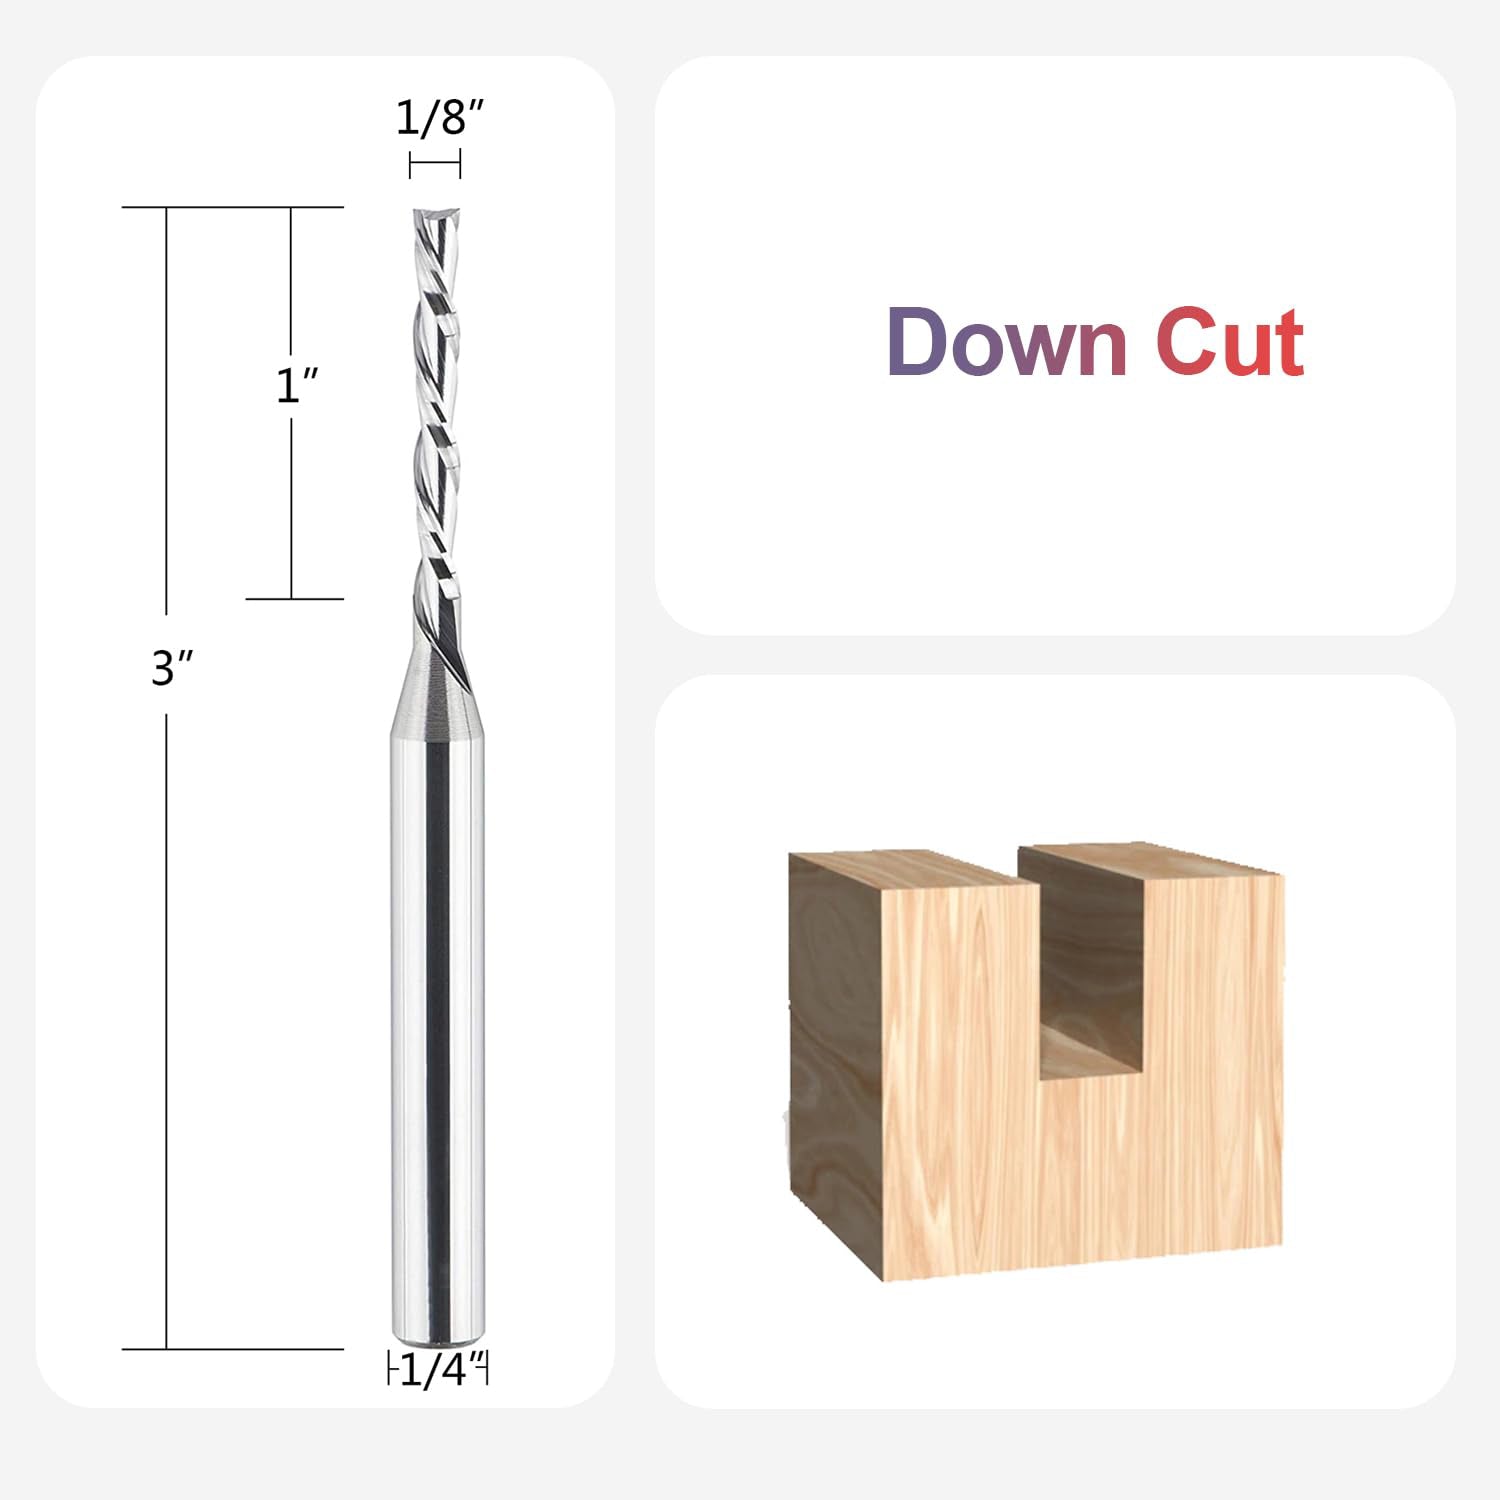 SpeTool Downcut Solid Carbide 1/8 CD 1/4 Shank 3 inch Long Router Bit